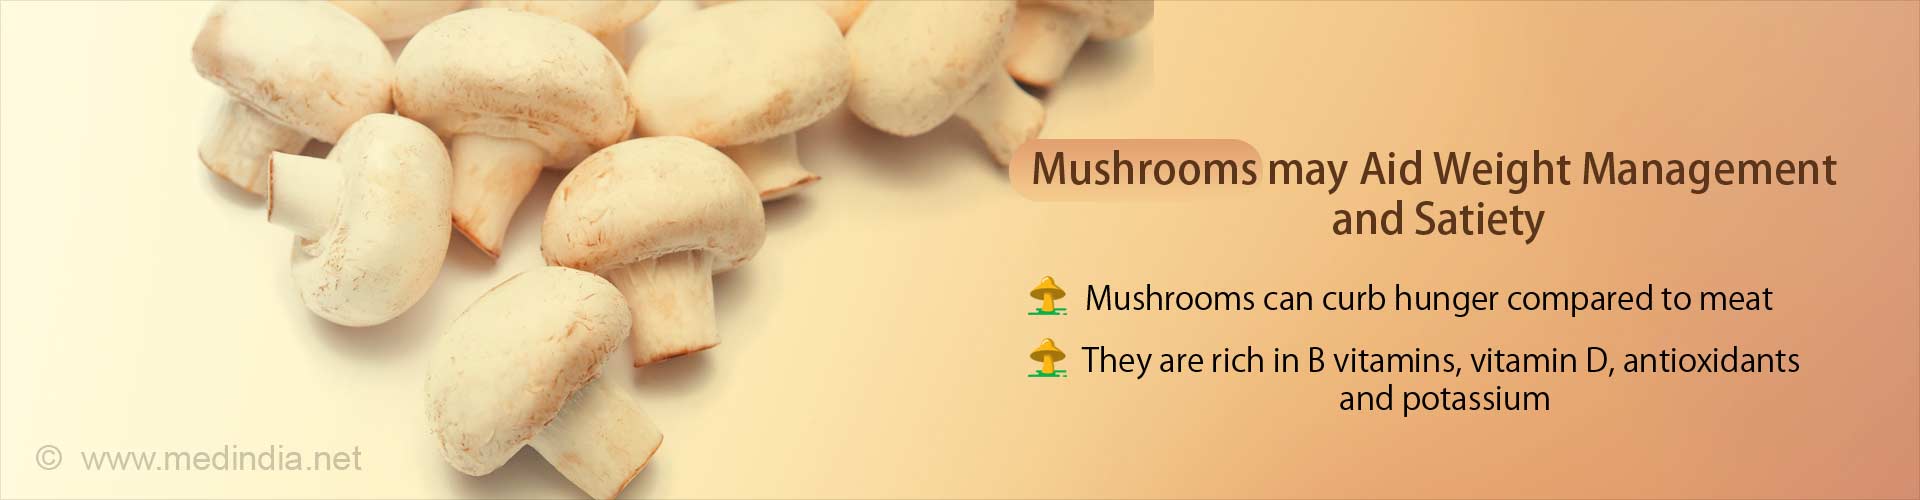 Mushrooms may aid weight management and satiety
- Mushrooms can curb hunger compared to meat
- They are rich in B vitamins, vitamin D, antioxidants and potassium